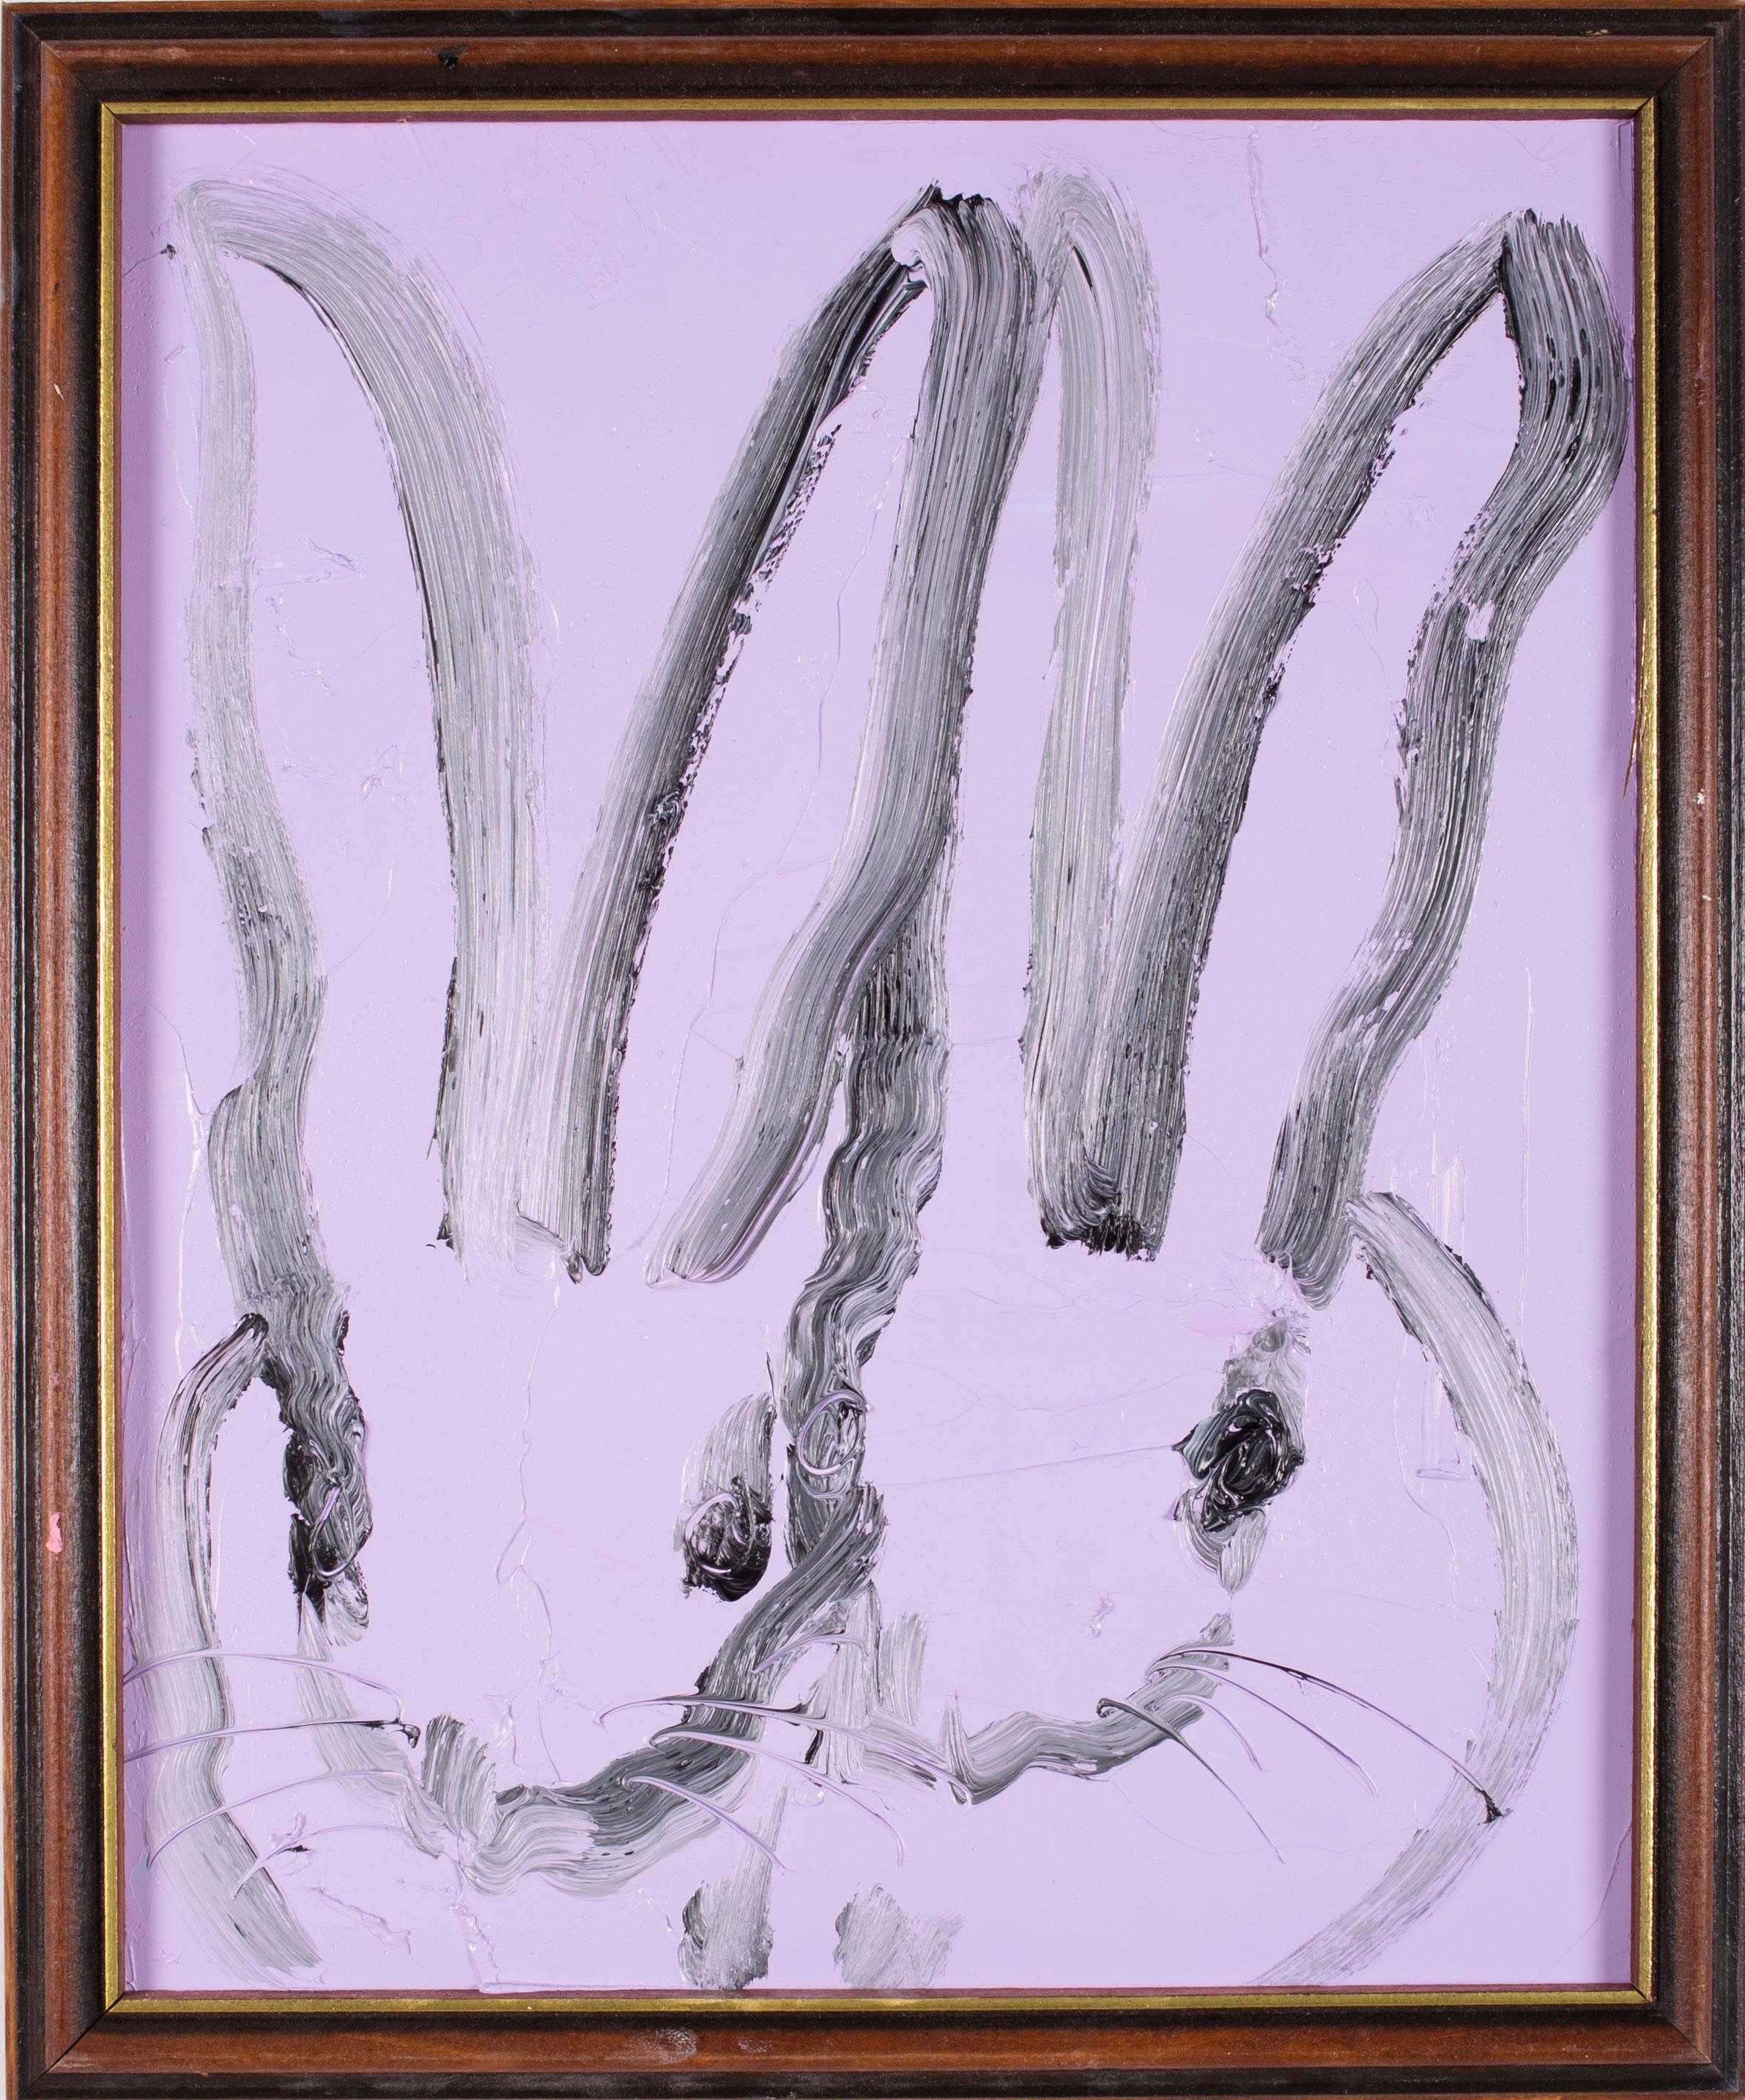 Hunt Slonem Untitled Purple Double Bunny - Black gestured bunny on lavender purple background with wood frame included.

Framed Dimensions: 15.5" x 13"

Hunt Slonem is a well-renowned American artist is known for his neo-expressionist paintings of